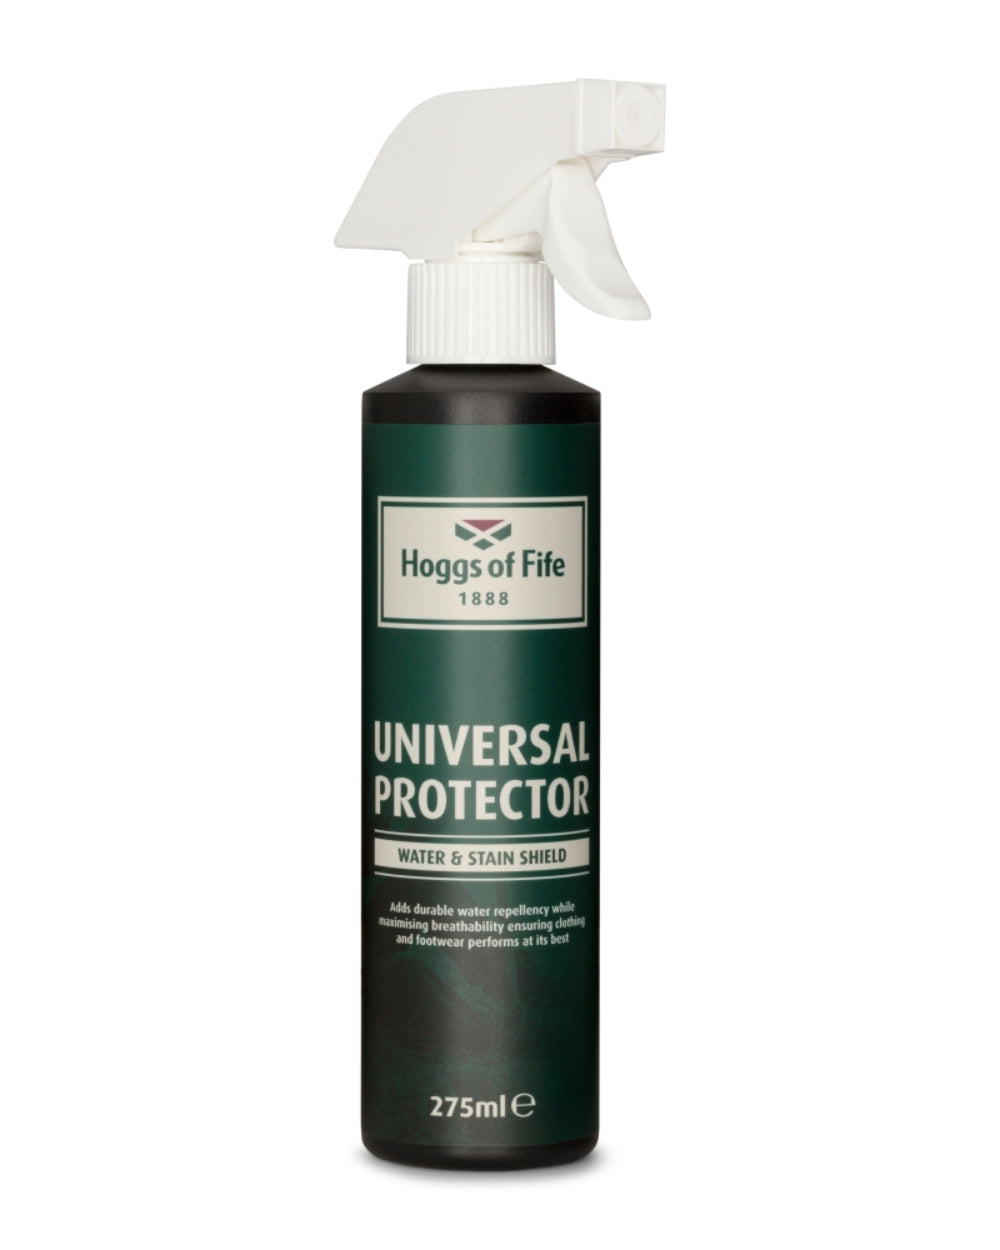 Neutral Coloured Hoggs of Fife Universal Protector 275ml Trigger Spray On A White Background